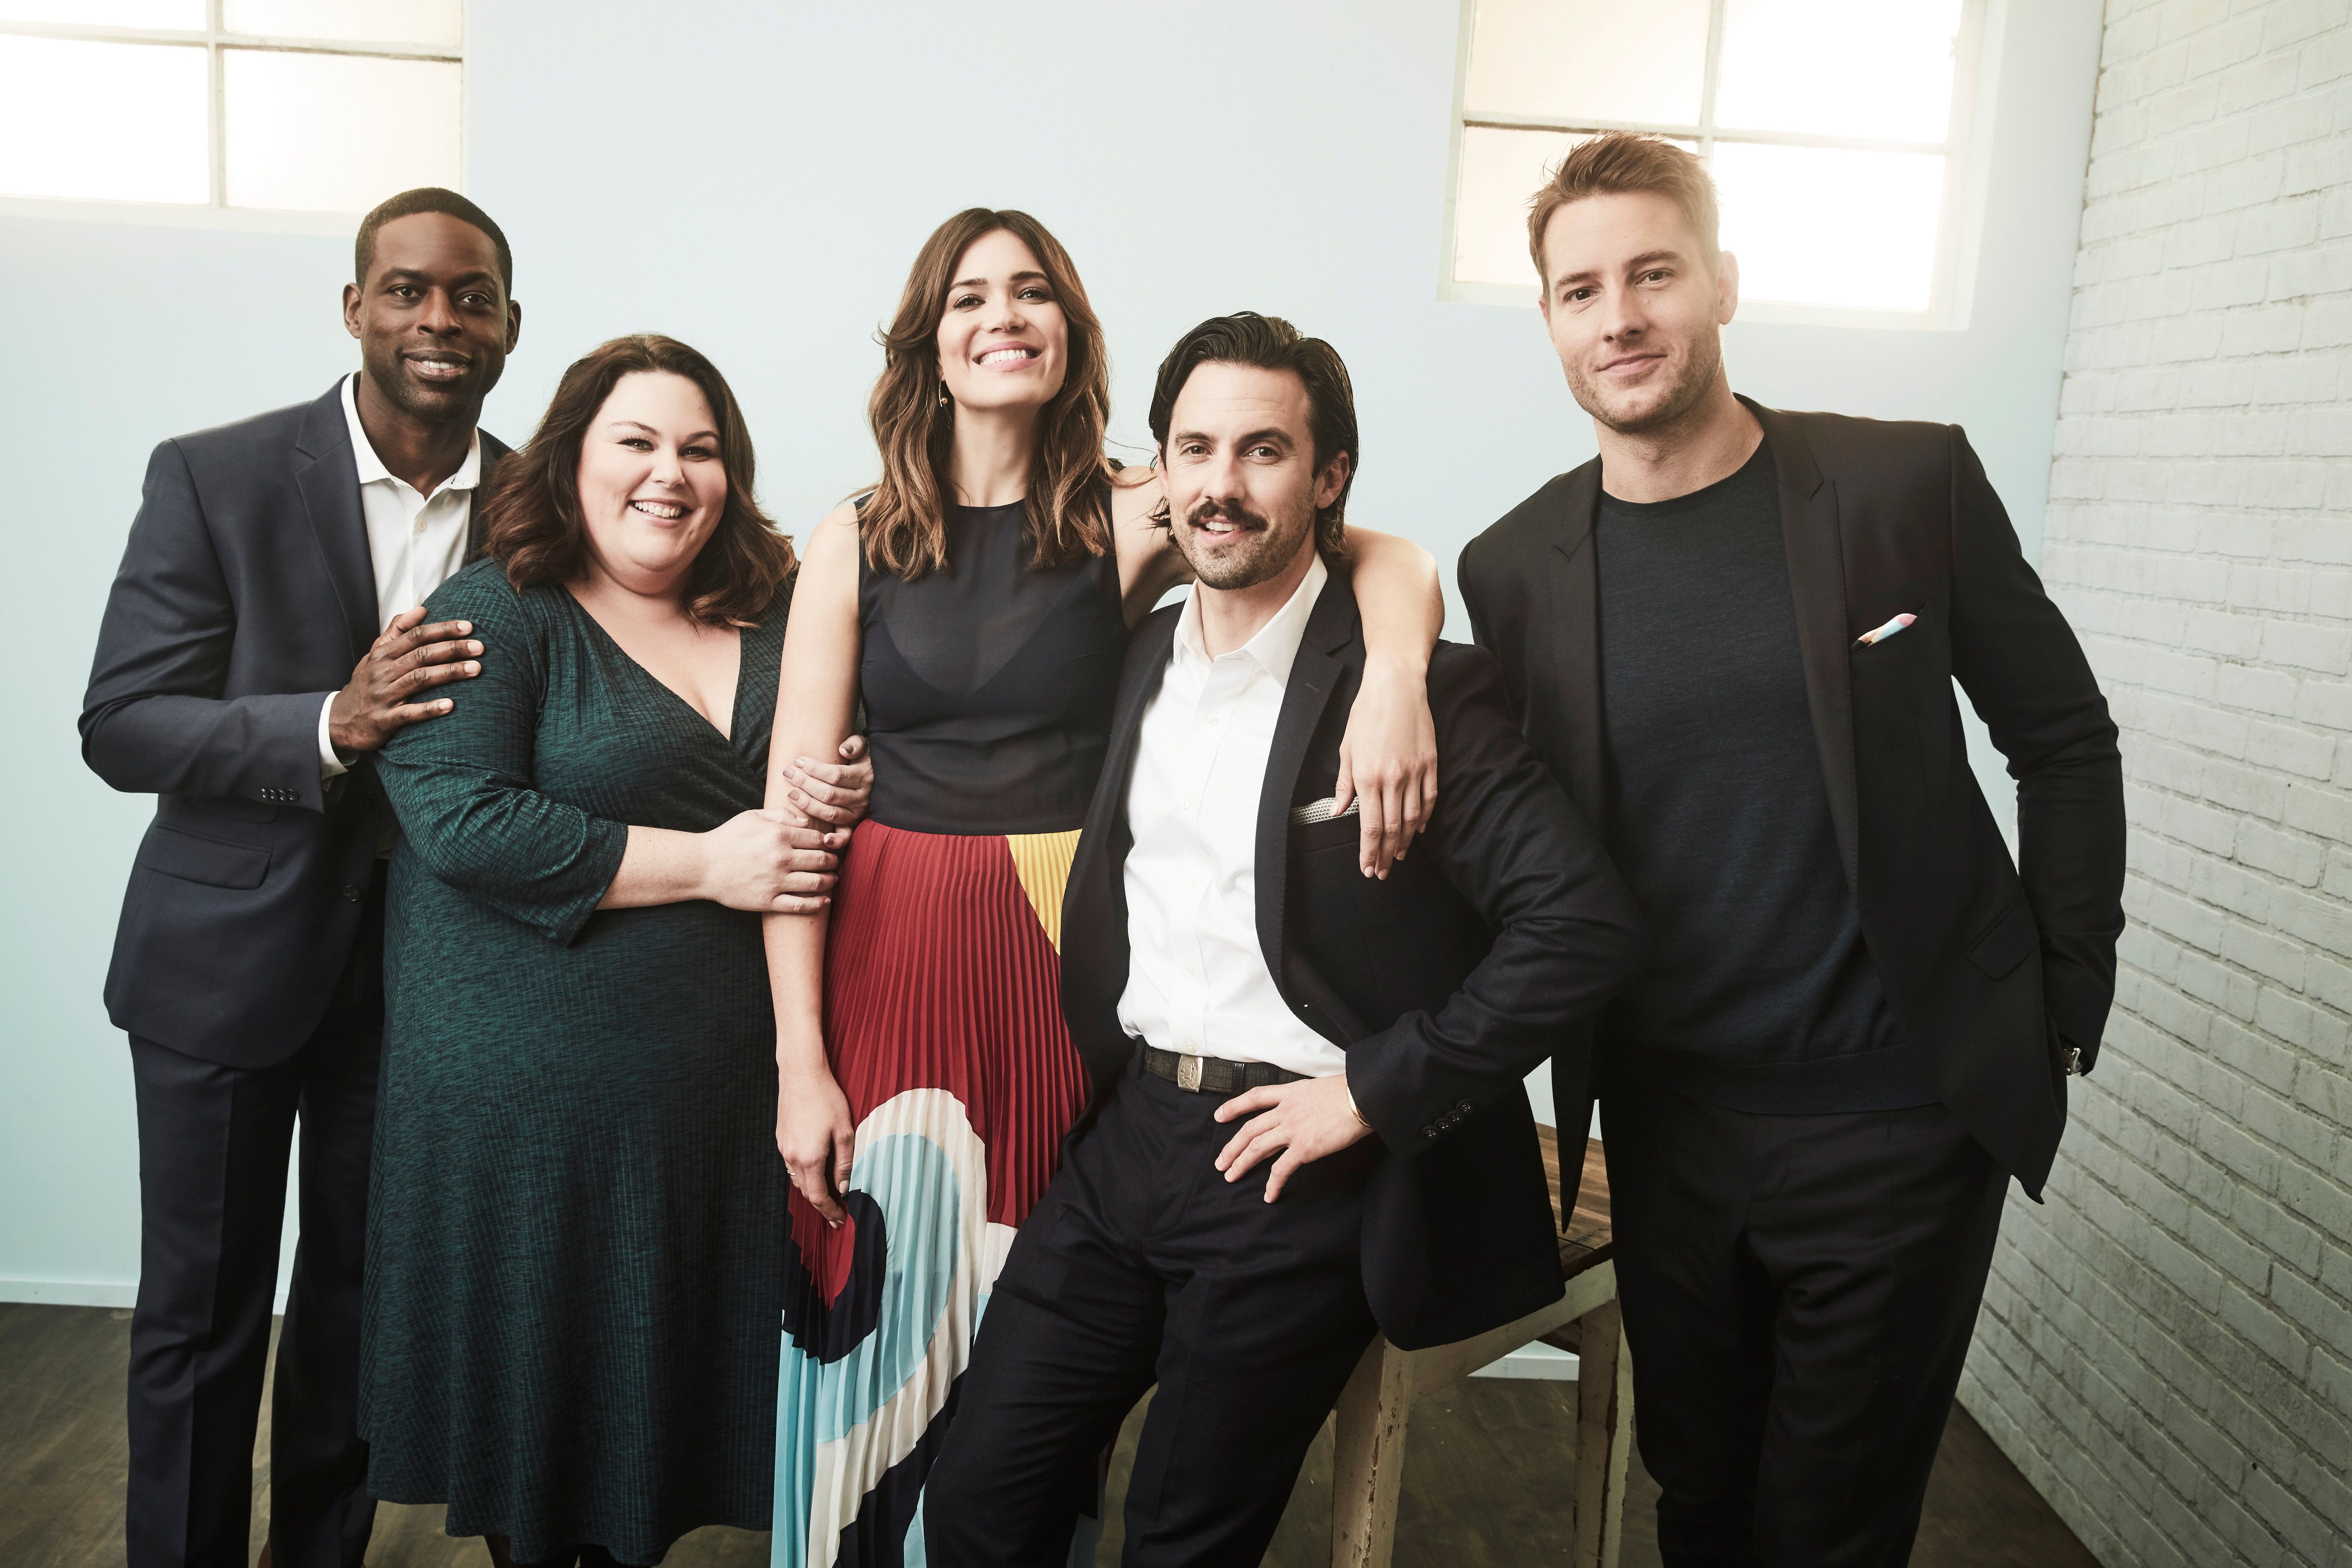 The cast of "This Is Us" pose for a portrait in the NBCUniversal Press Tour portrait studio at The Langham Huntington, Pasadena on January 18, 2017 | Photo: Getty Images